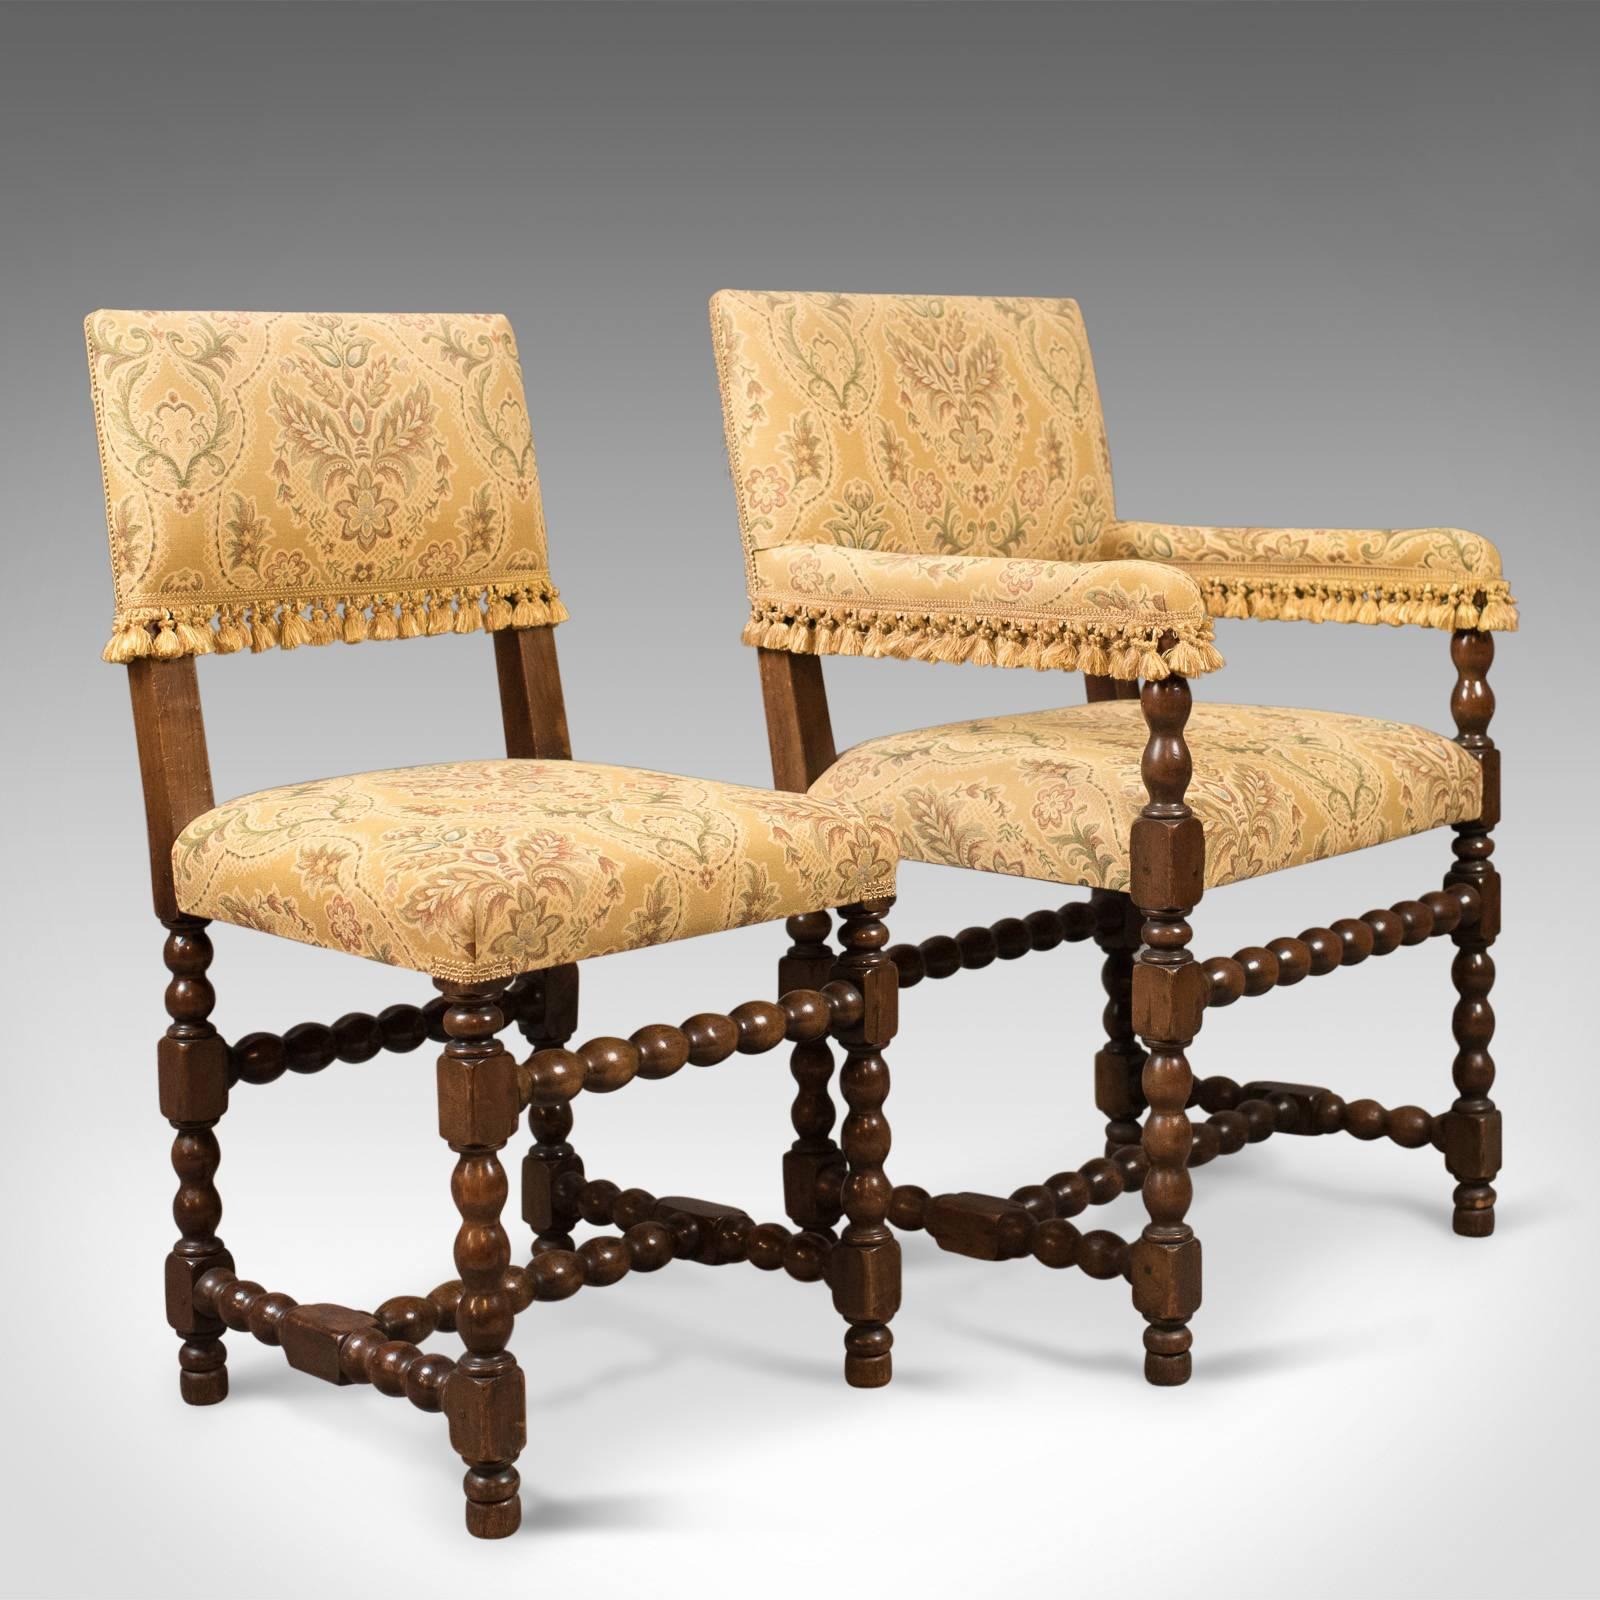 This is a superior quality set of six antique dining chairs, Edwardian Jacobean revival.

A pair of carvers and four chairs
Bobbin turned dark English beech frames
Boxed joints, 'H' Stretcher and pegged joints

Upholstered in a golden,